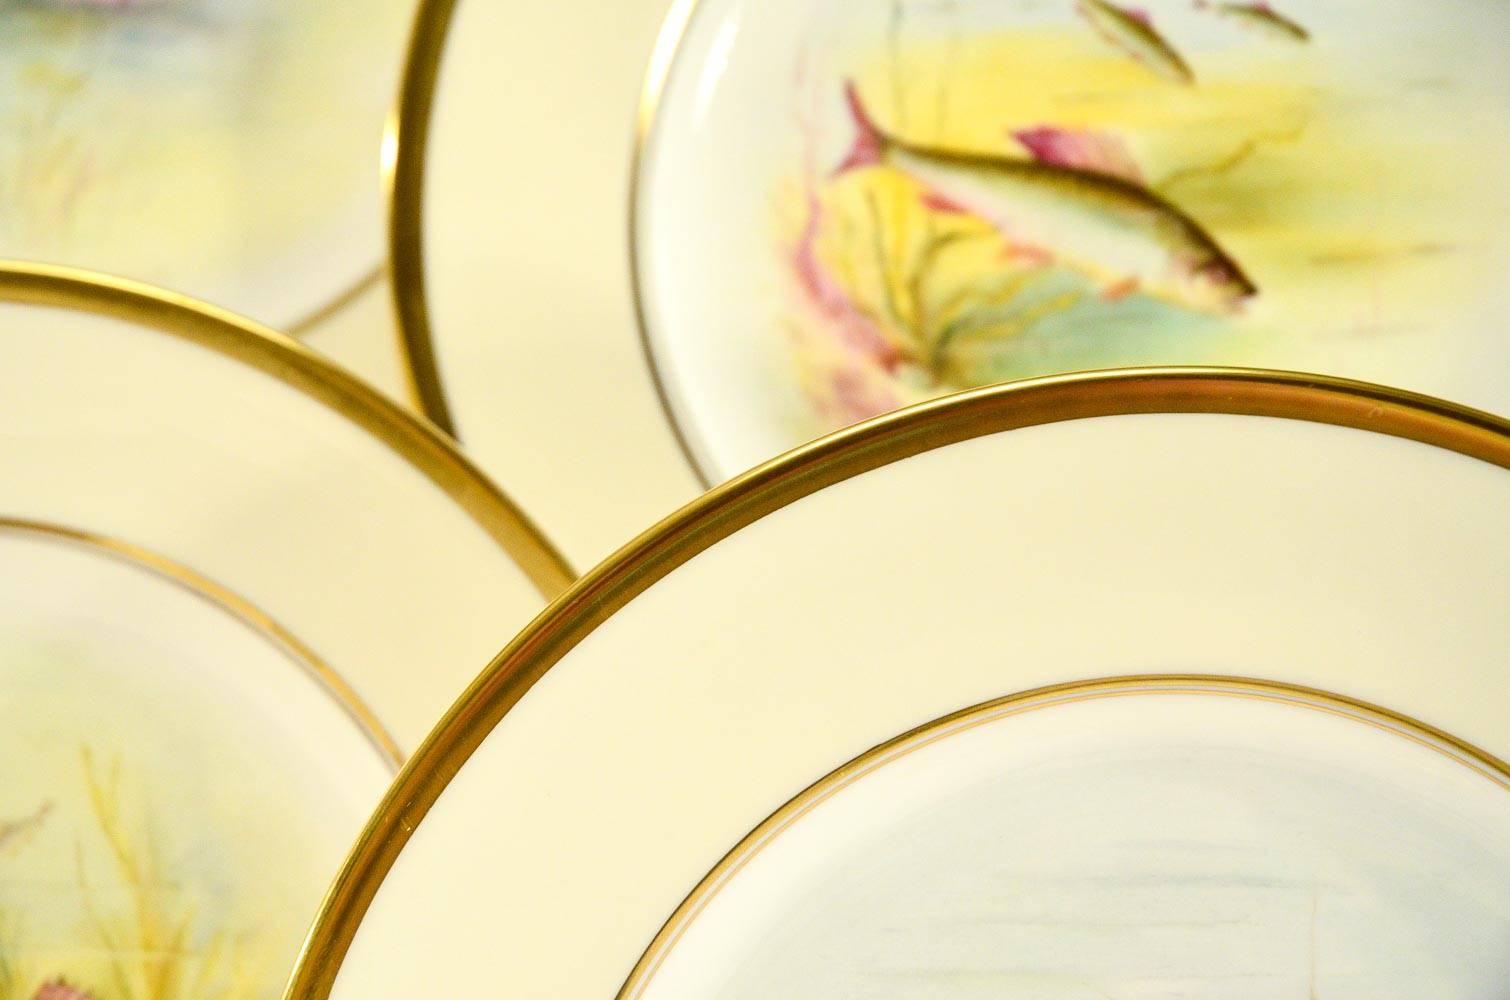 Minton Hand Painted Artist Signed Fish Service with Platter, 12 Plates and Gravy In Excellent Condition For Sale In Great Barrington, MA